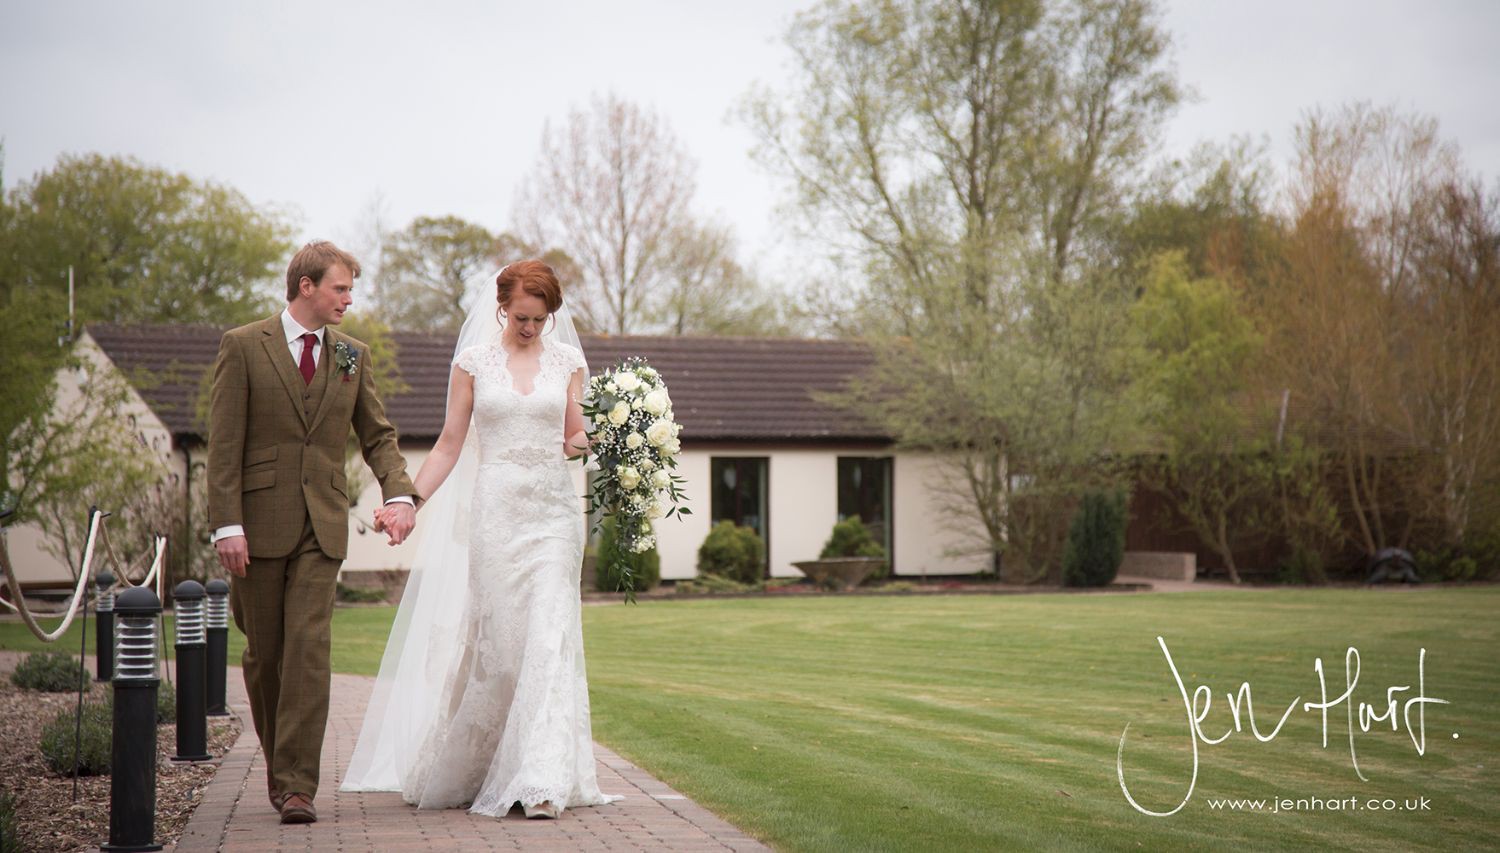 Photograph-Wedding-Whinstone-View_02May15_171